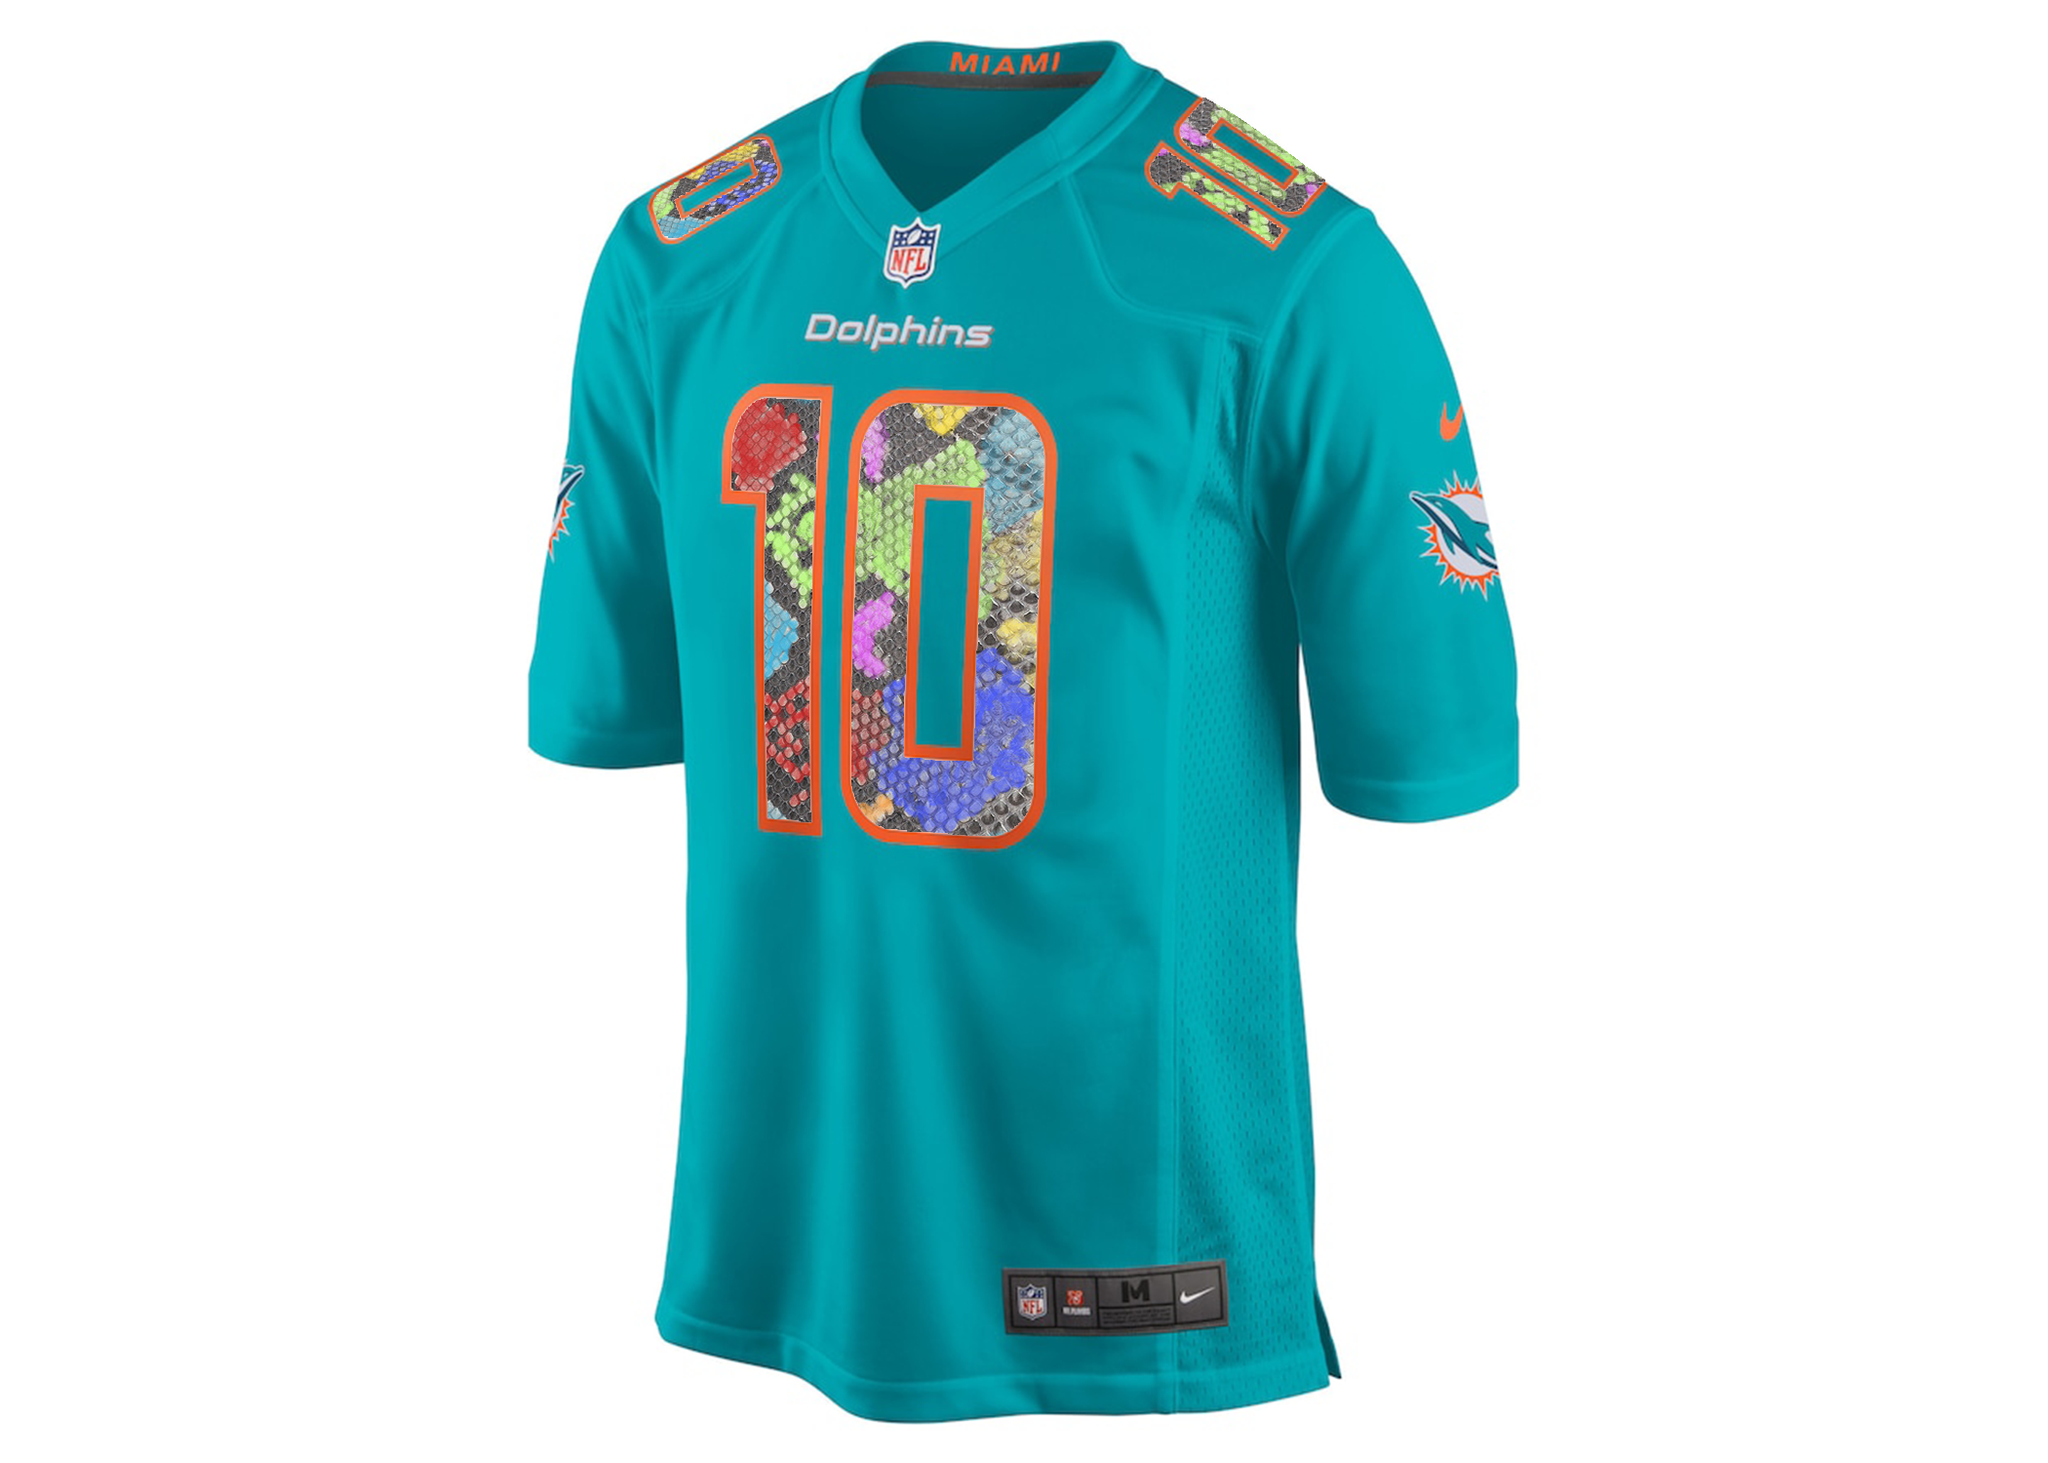 Nike Tyreek Hill Miami Dolphins Python Jersey (Vice City Edition)